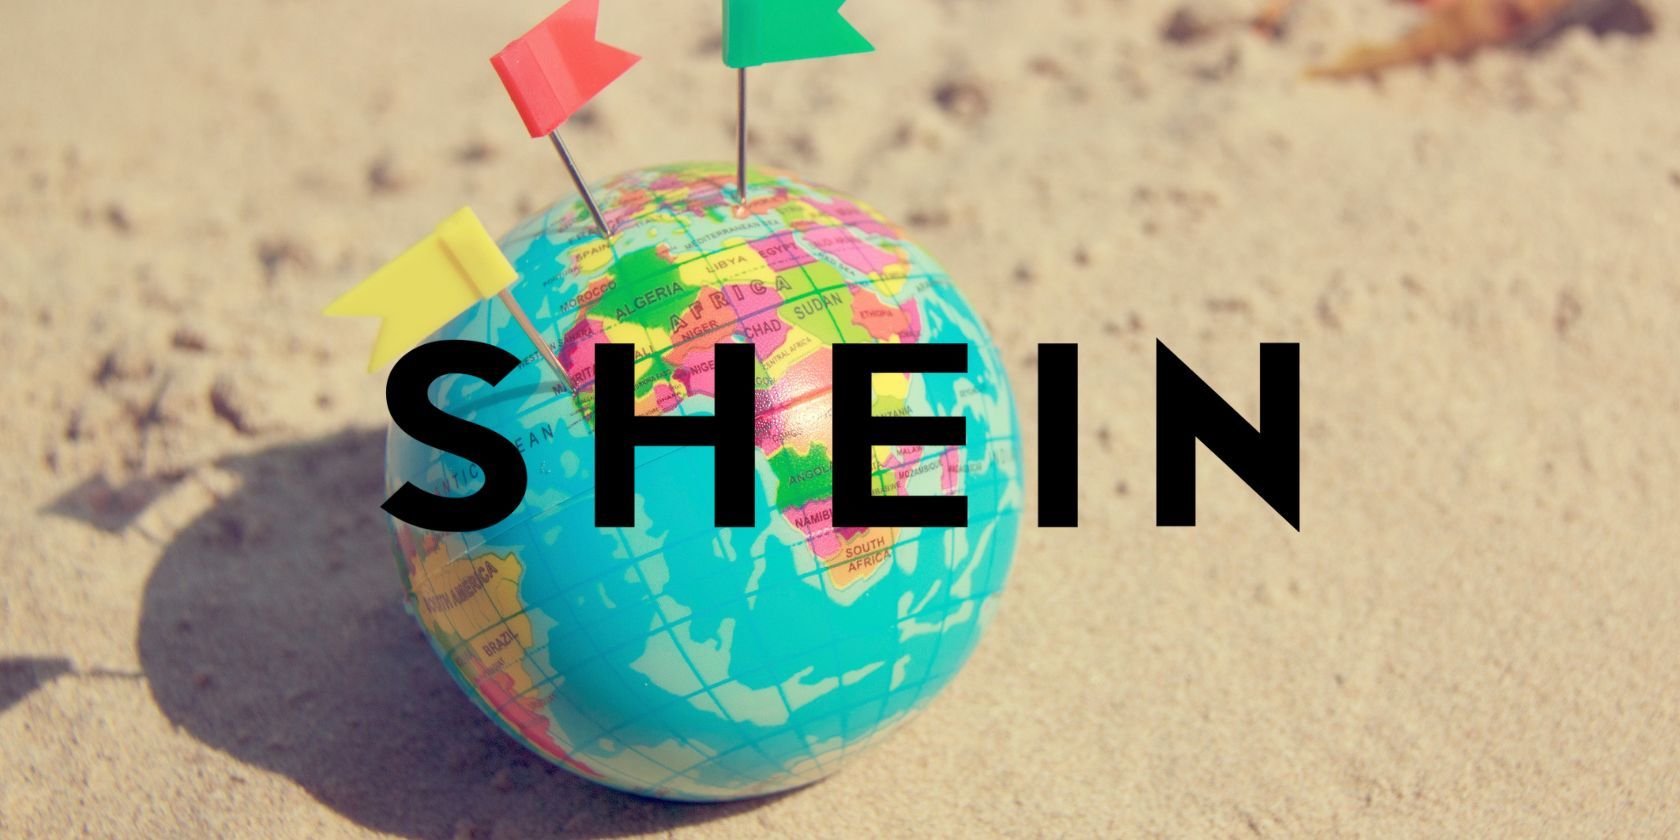 Where Does Shein Ship From and How Is it So Cheap?